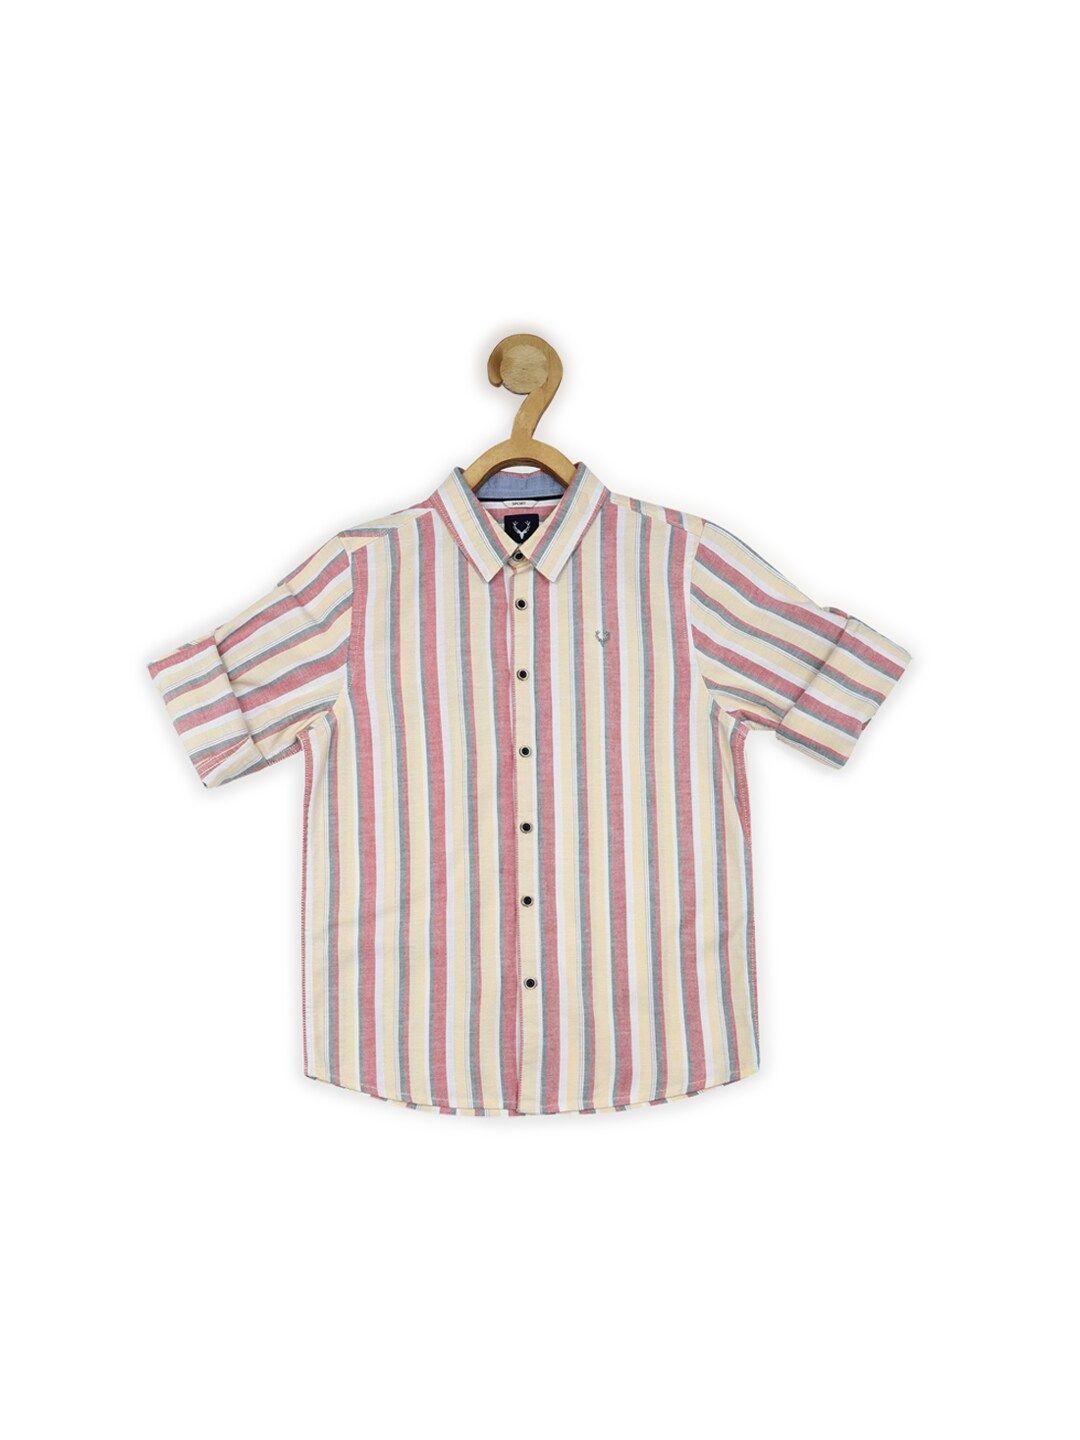 allen solly junior boys slim fit stripes spread collar roll-up sleeves cotton casual shirt